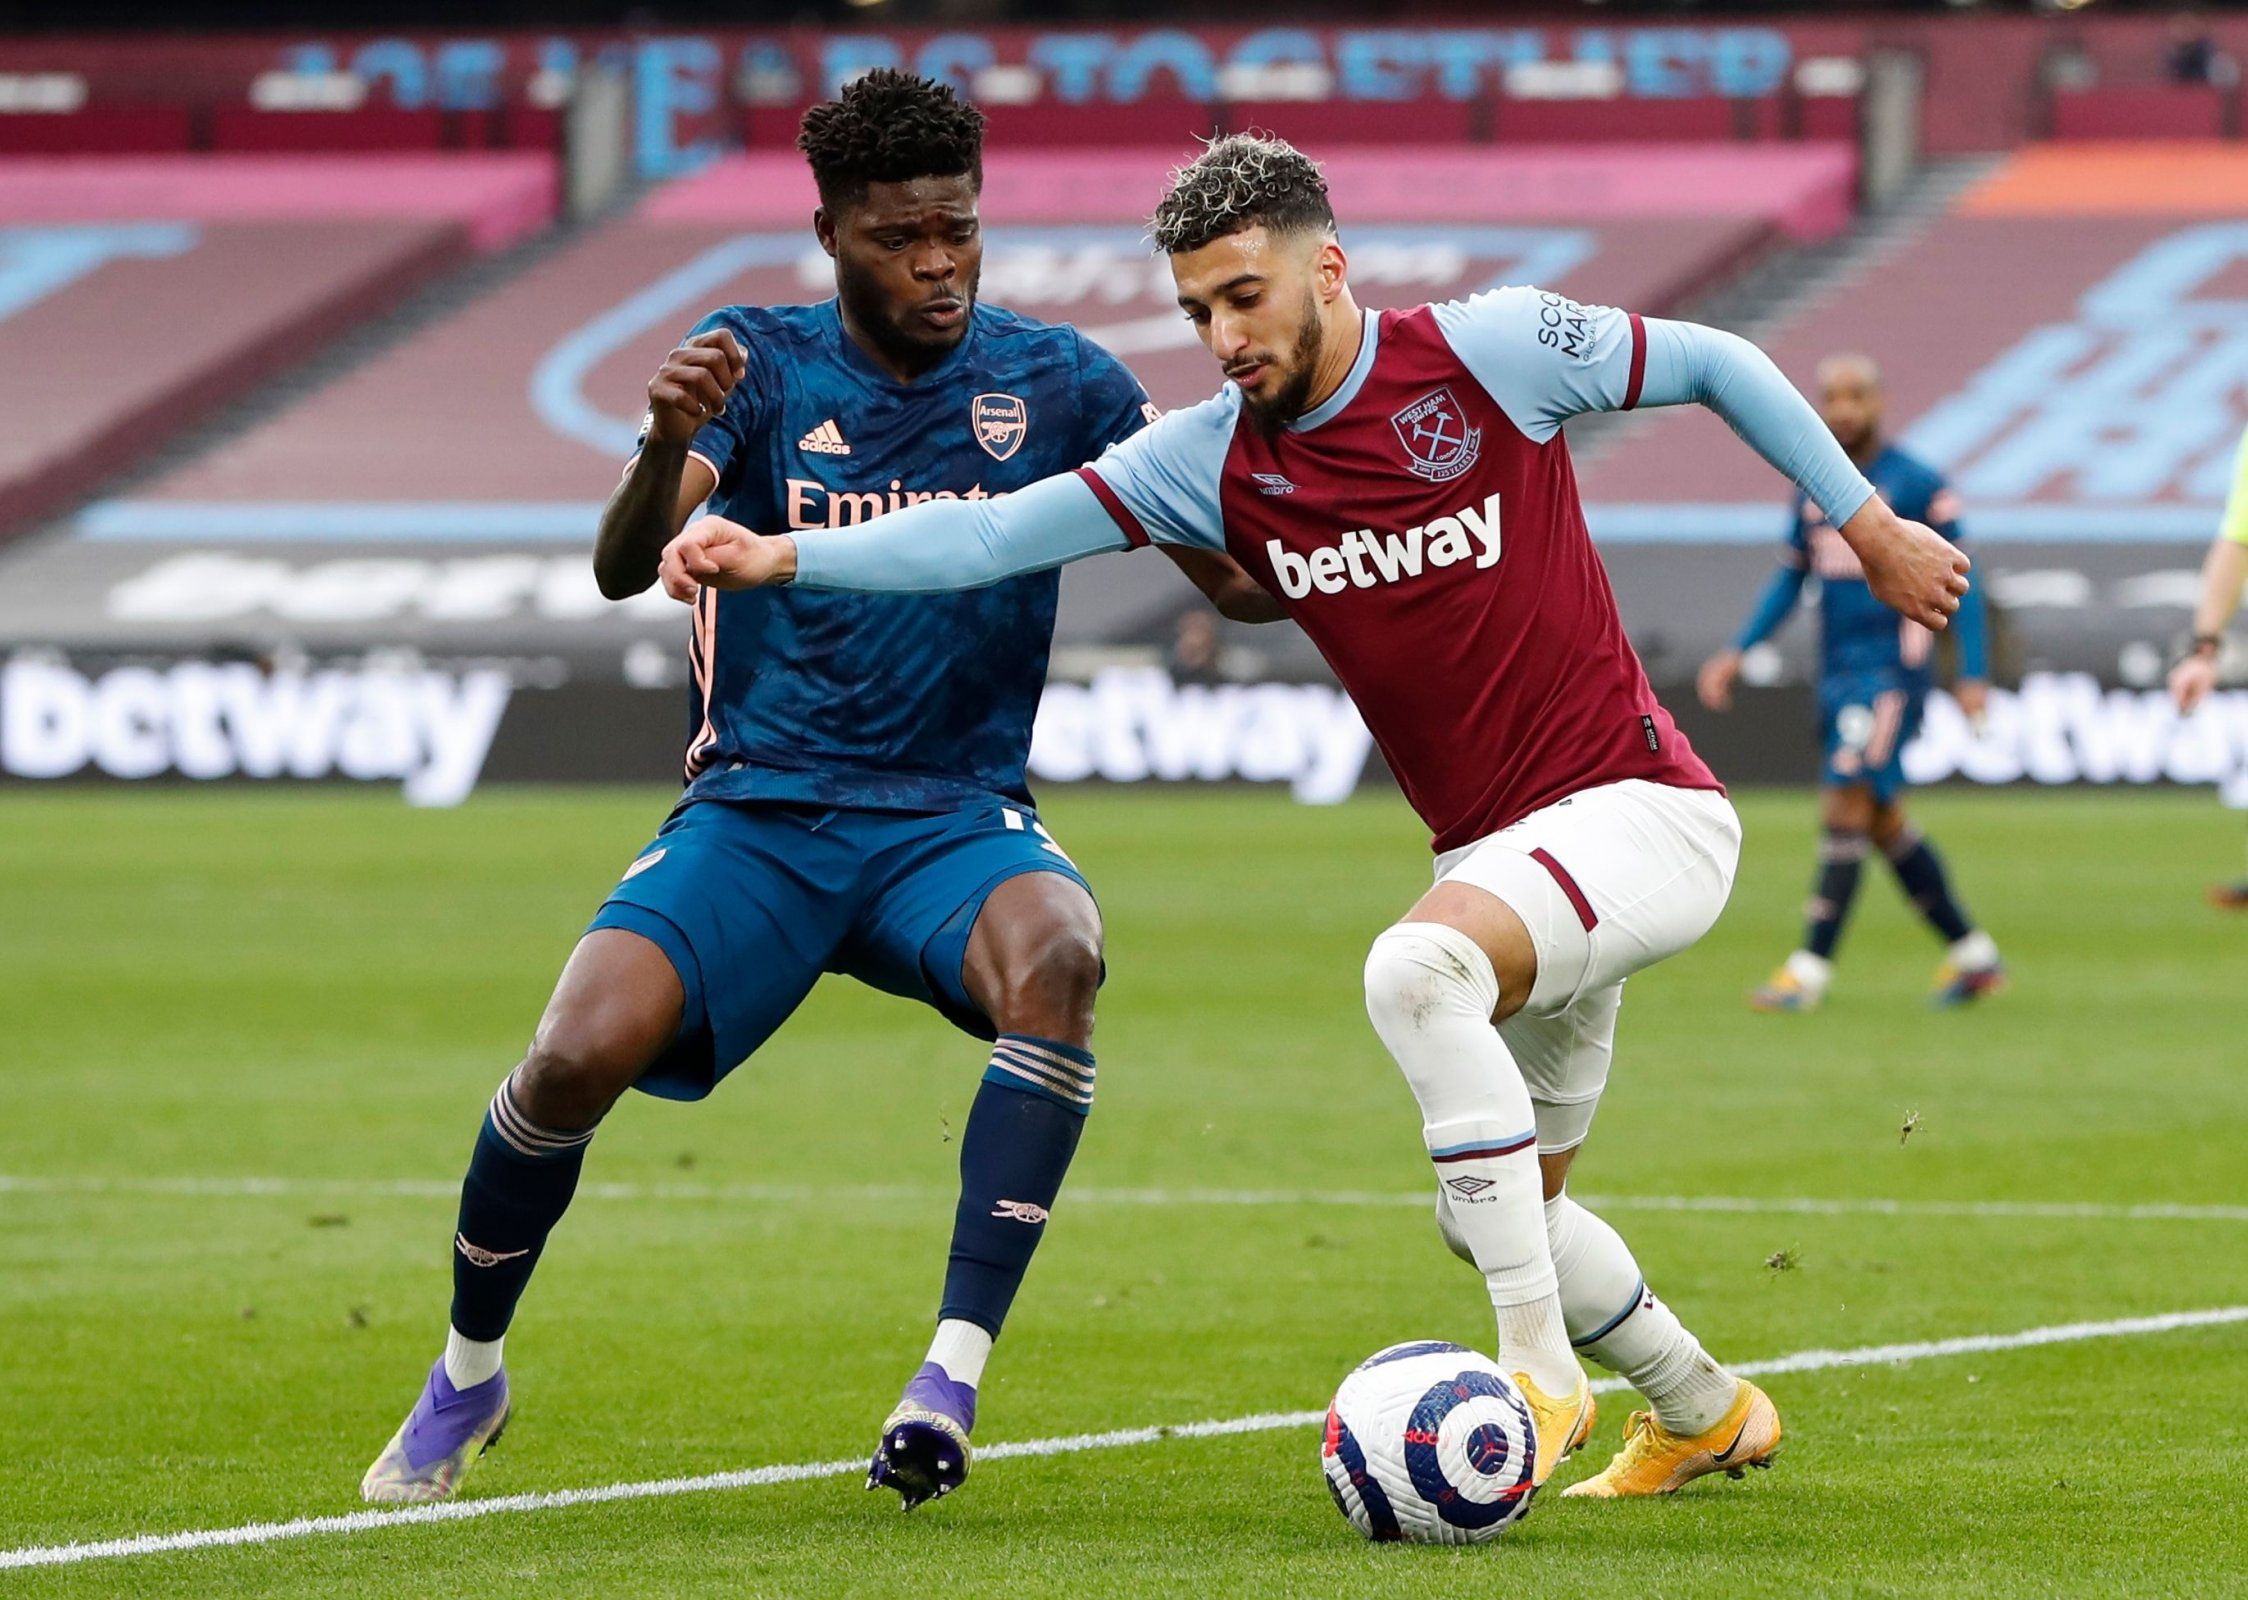 West Ham United's Said Benrahma in action with Arsenal's Thomas Partey